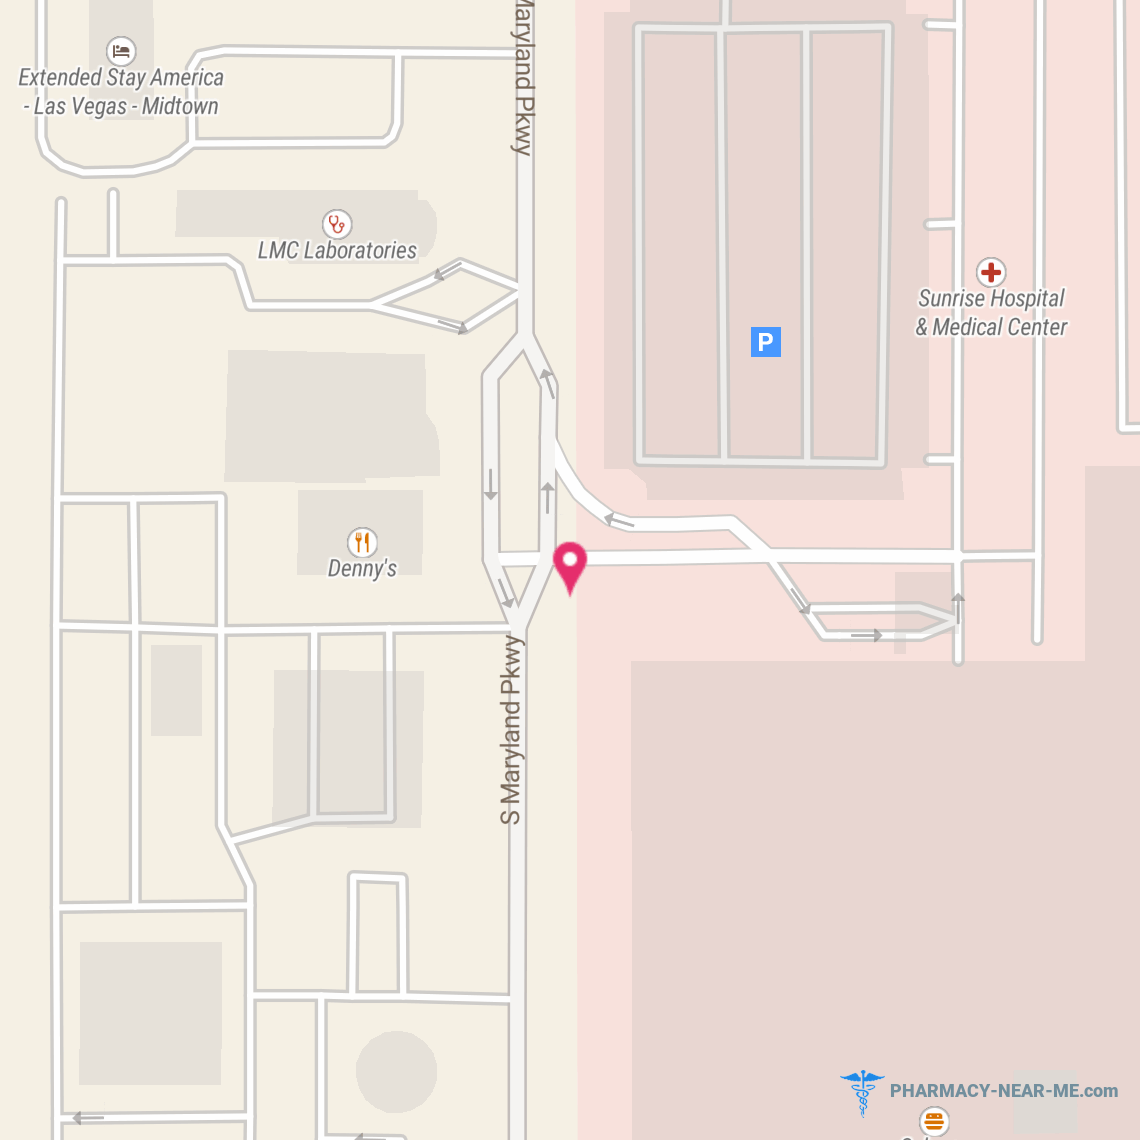 WALGREENS #15103 - Pharmacy Hours, Phone, Reviews & Information: 3186 S Maryland Pkwy, Winchester, Nevada 89169, United States